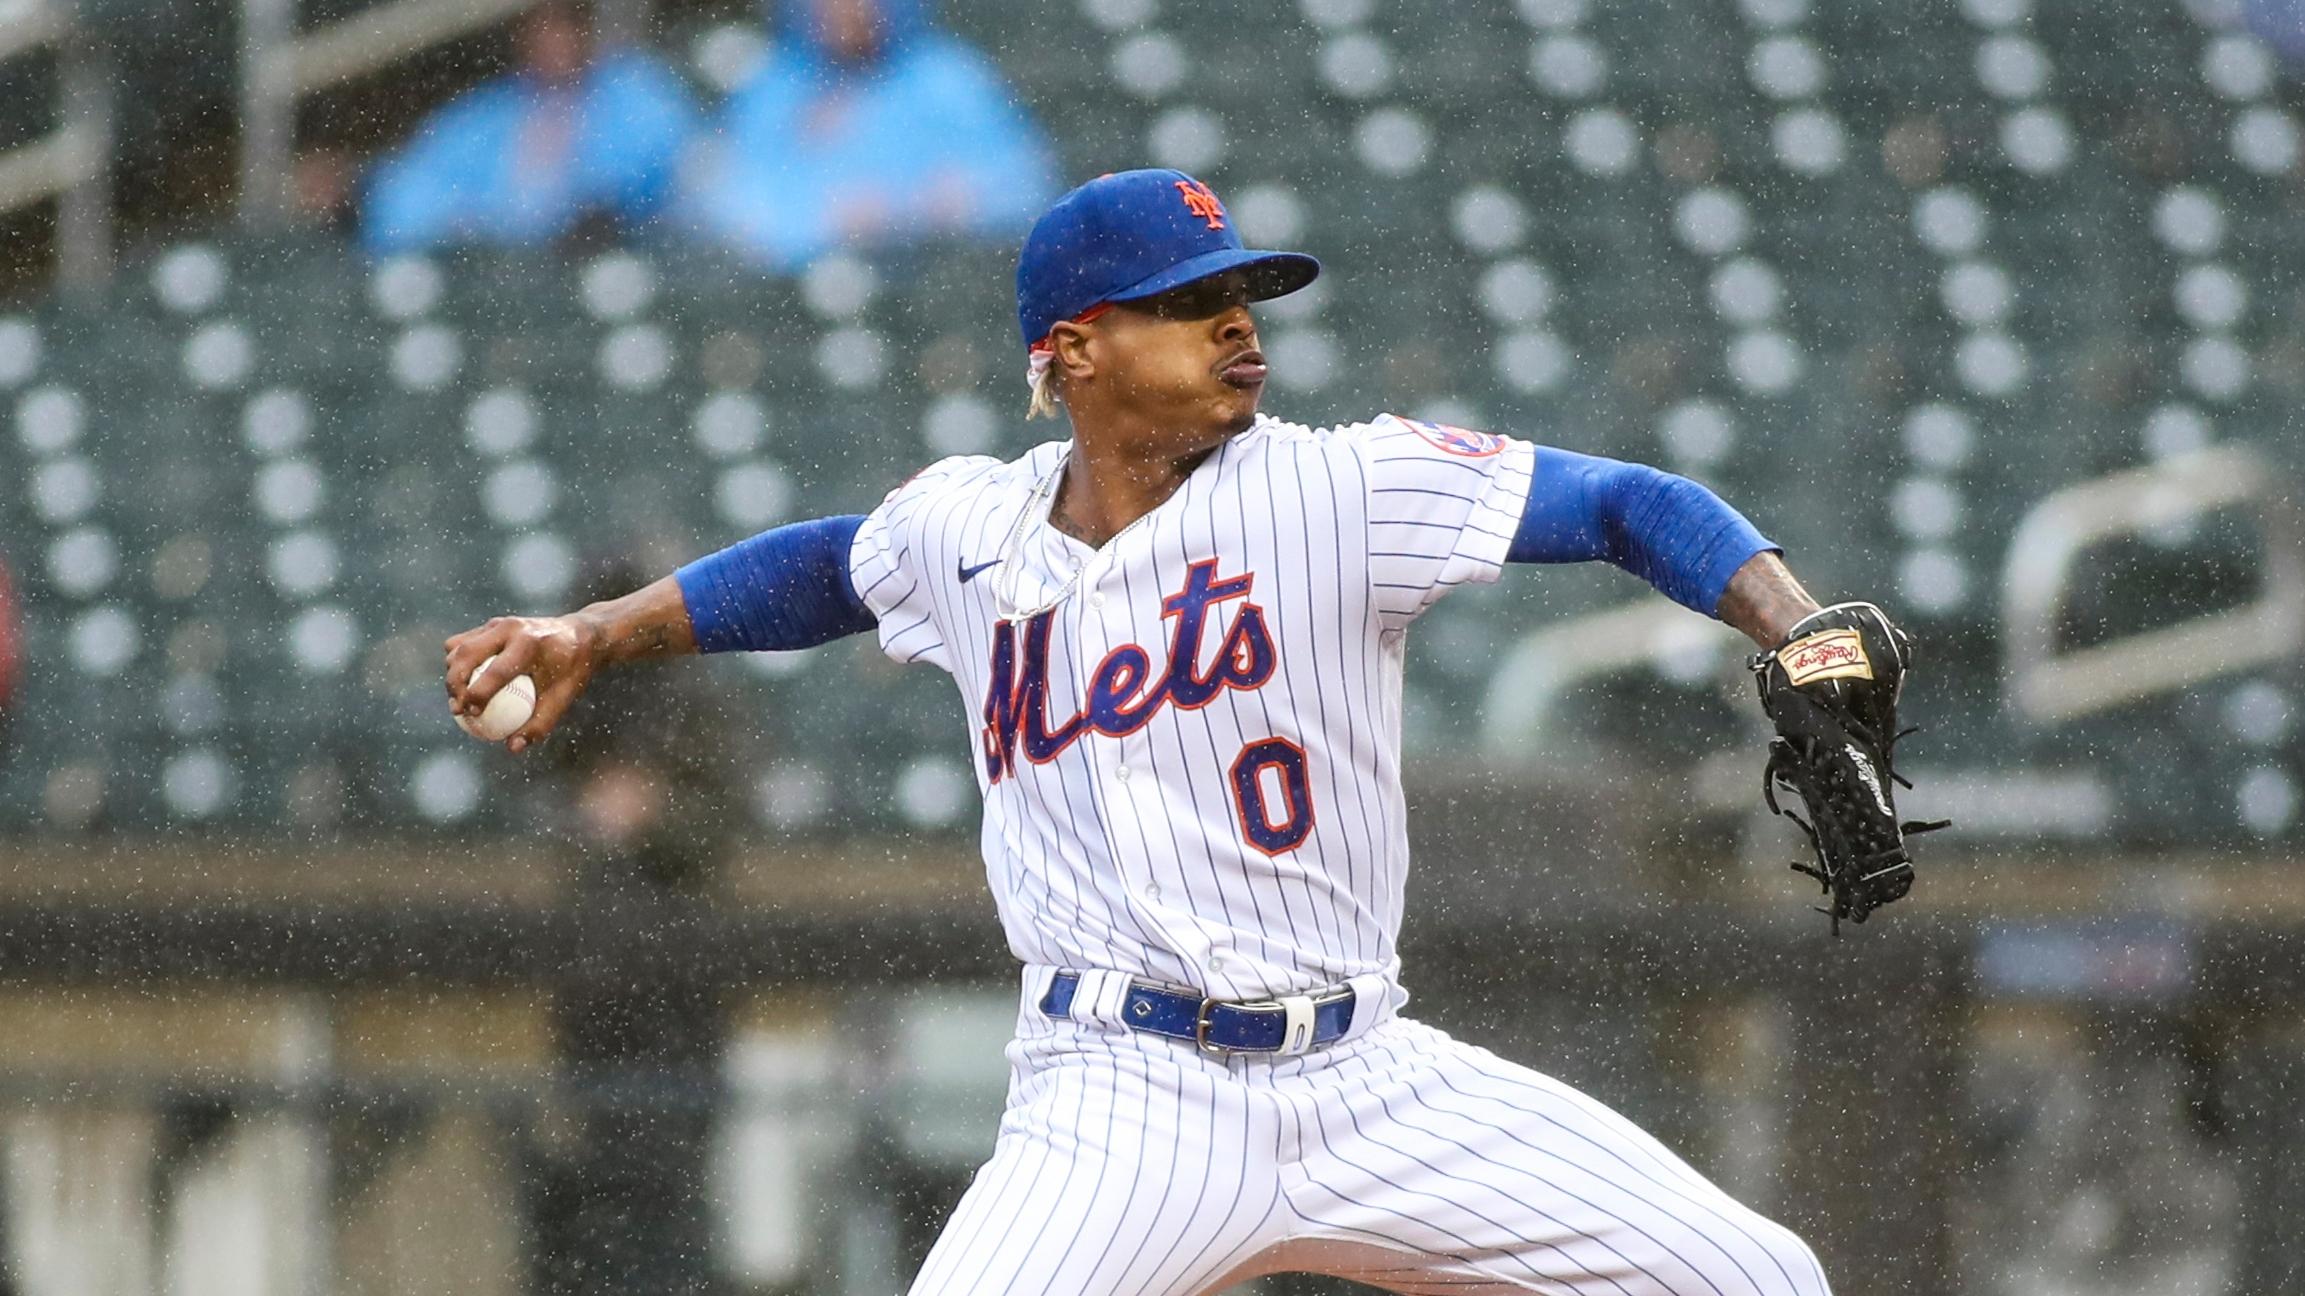 New York Mets pitcher Marcus Stroman (0) pitches in the first inning against the Miami Marlins prior to a rain delay being called at Citi Field. / Wendell Cruz-USA TODAY Sports